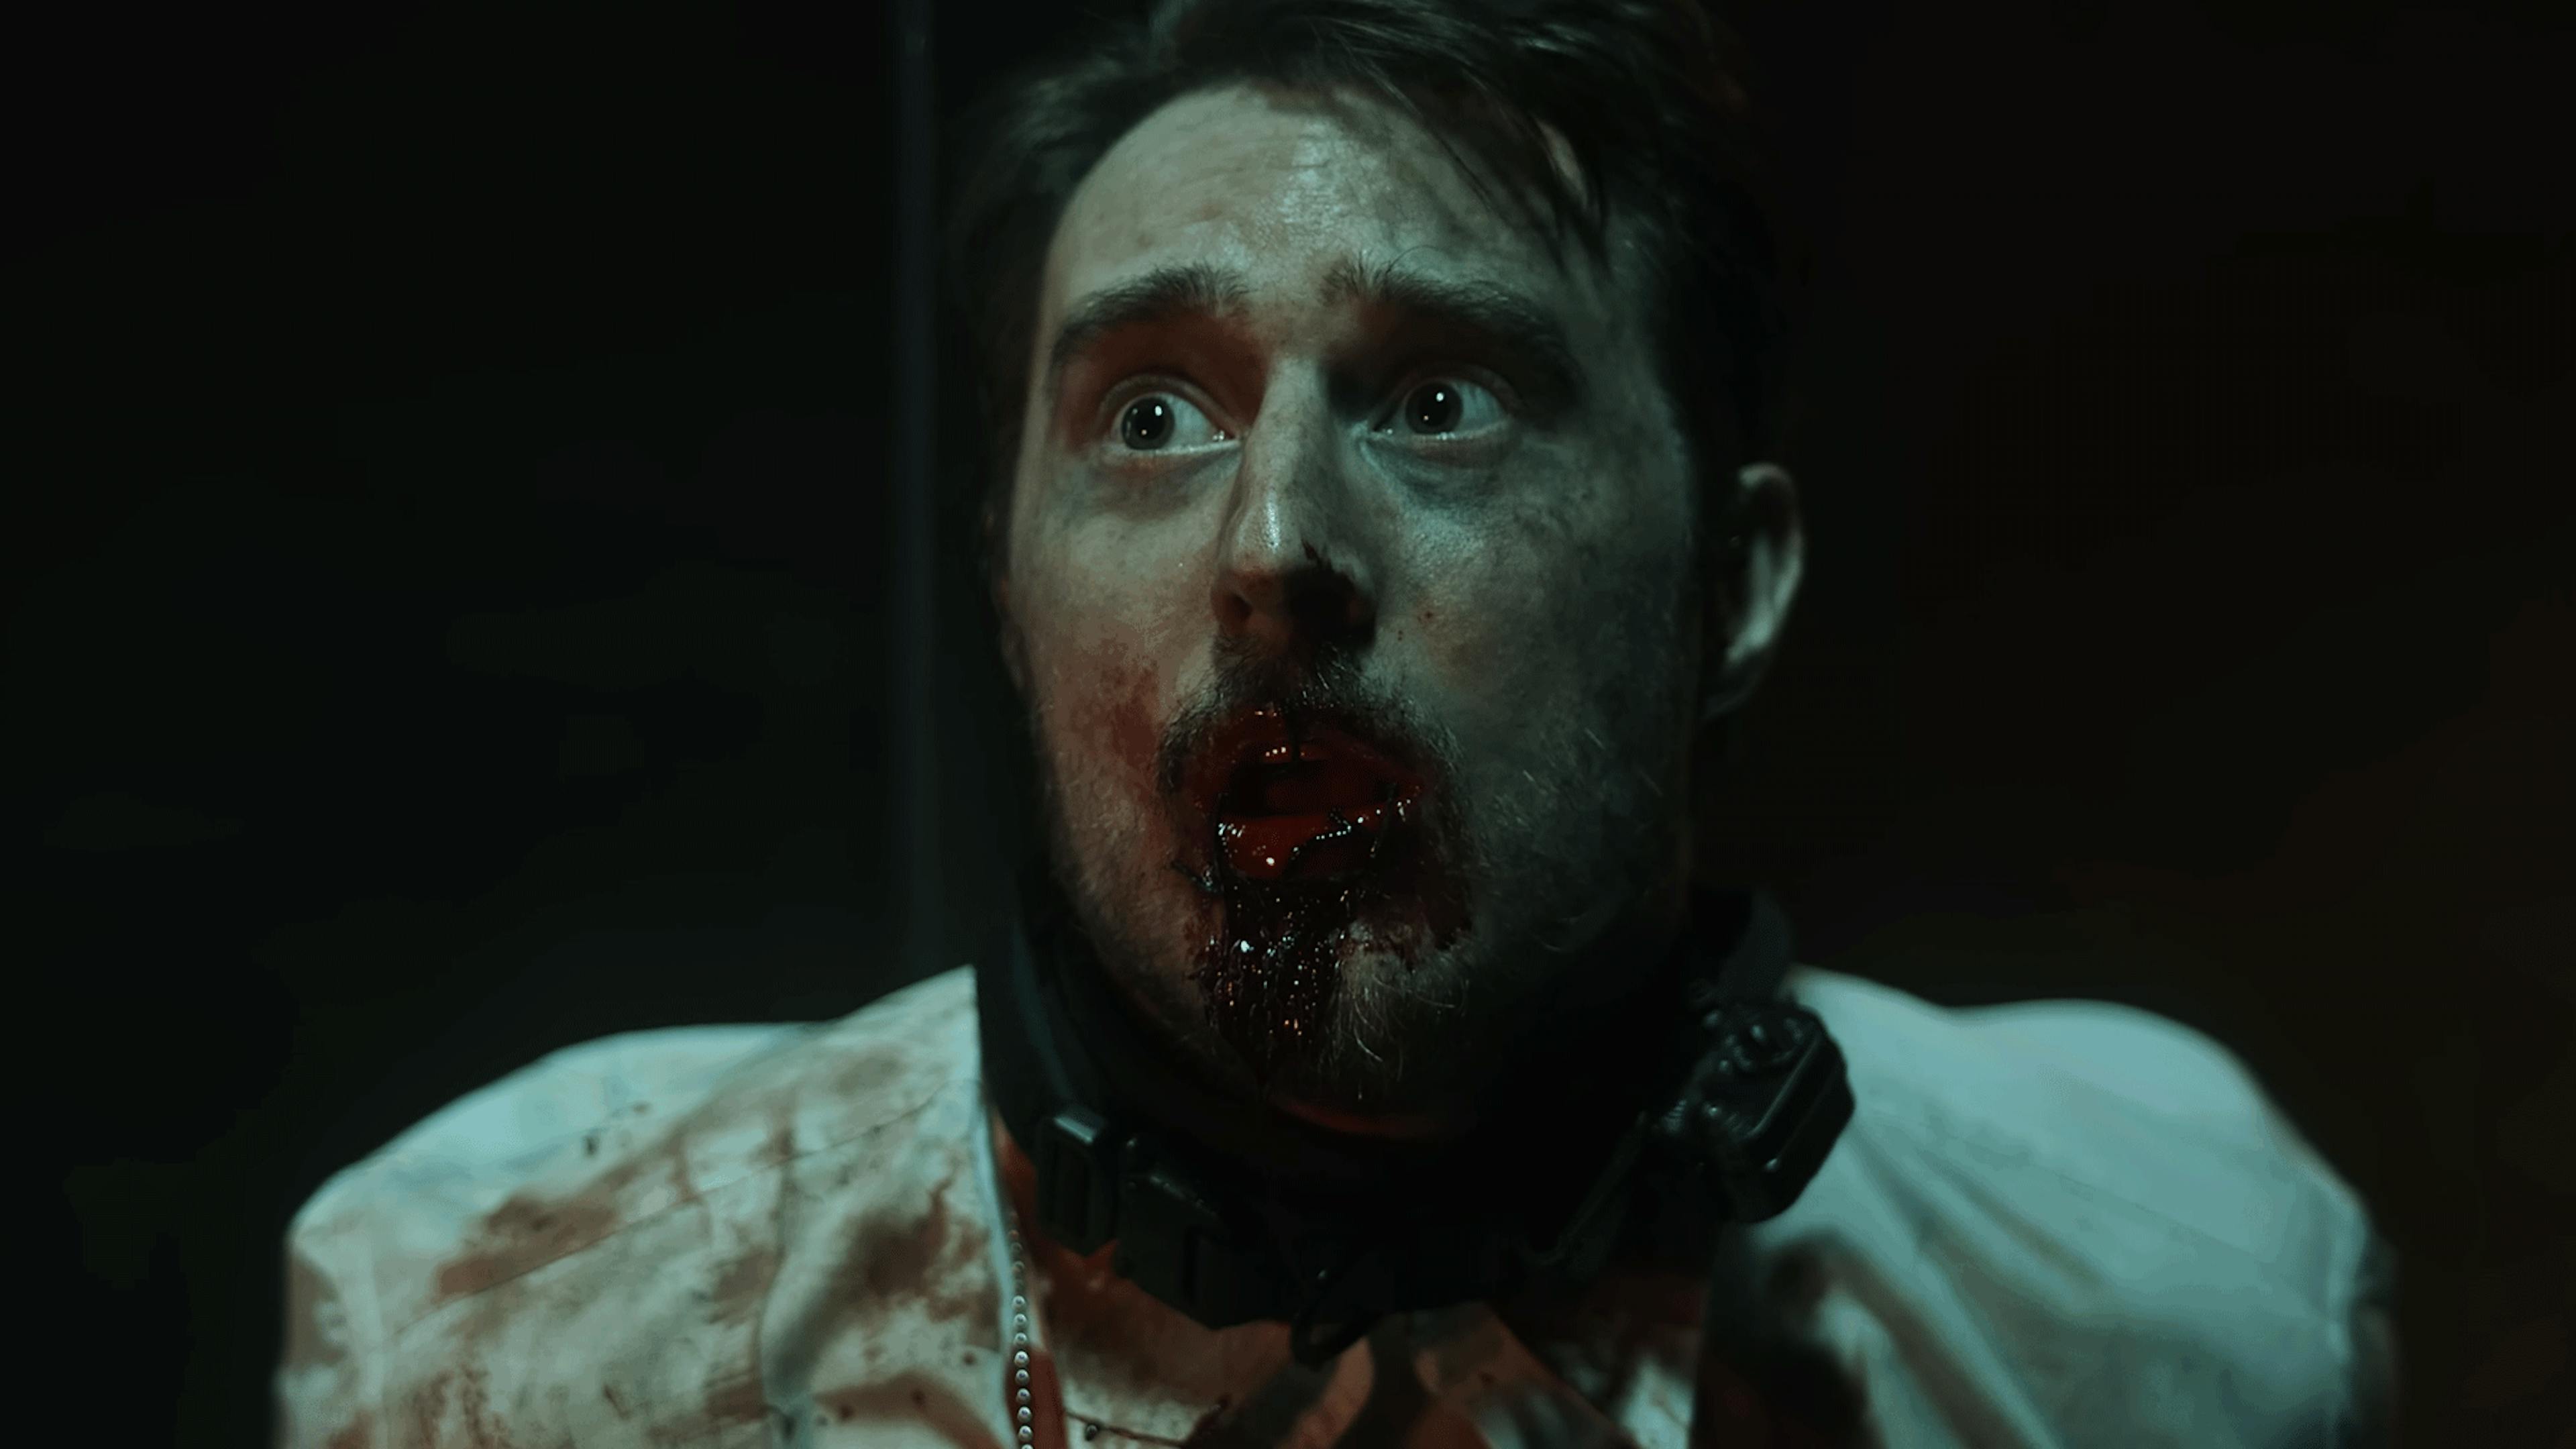 Watch Ice Nine Kills’ gory, uncensored video for Welcome To Horrorwood